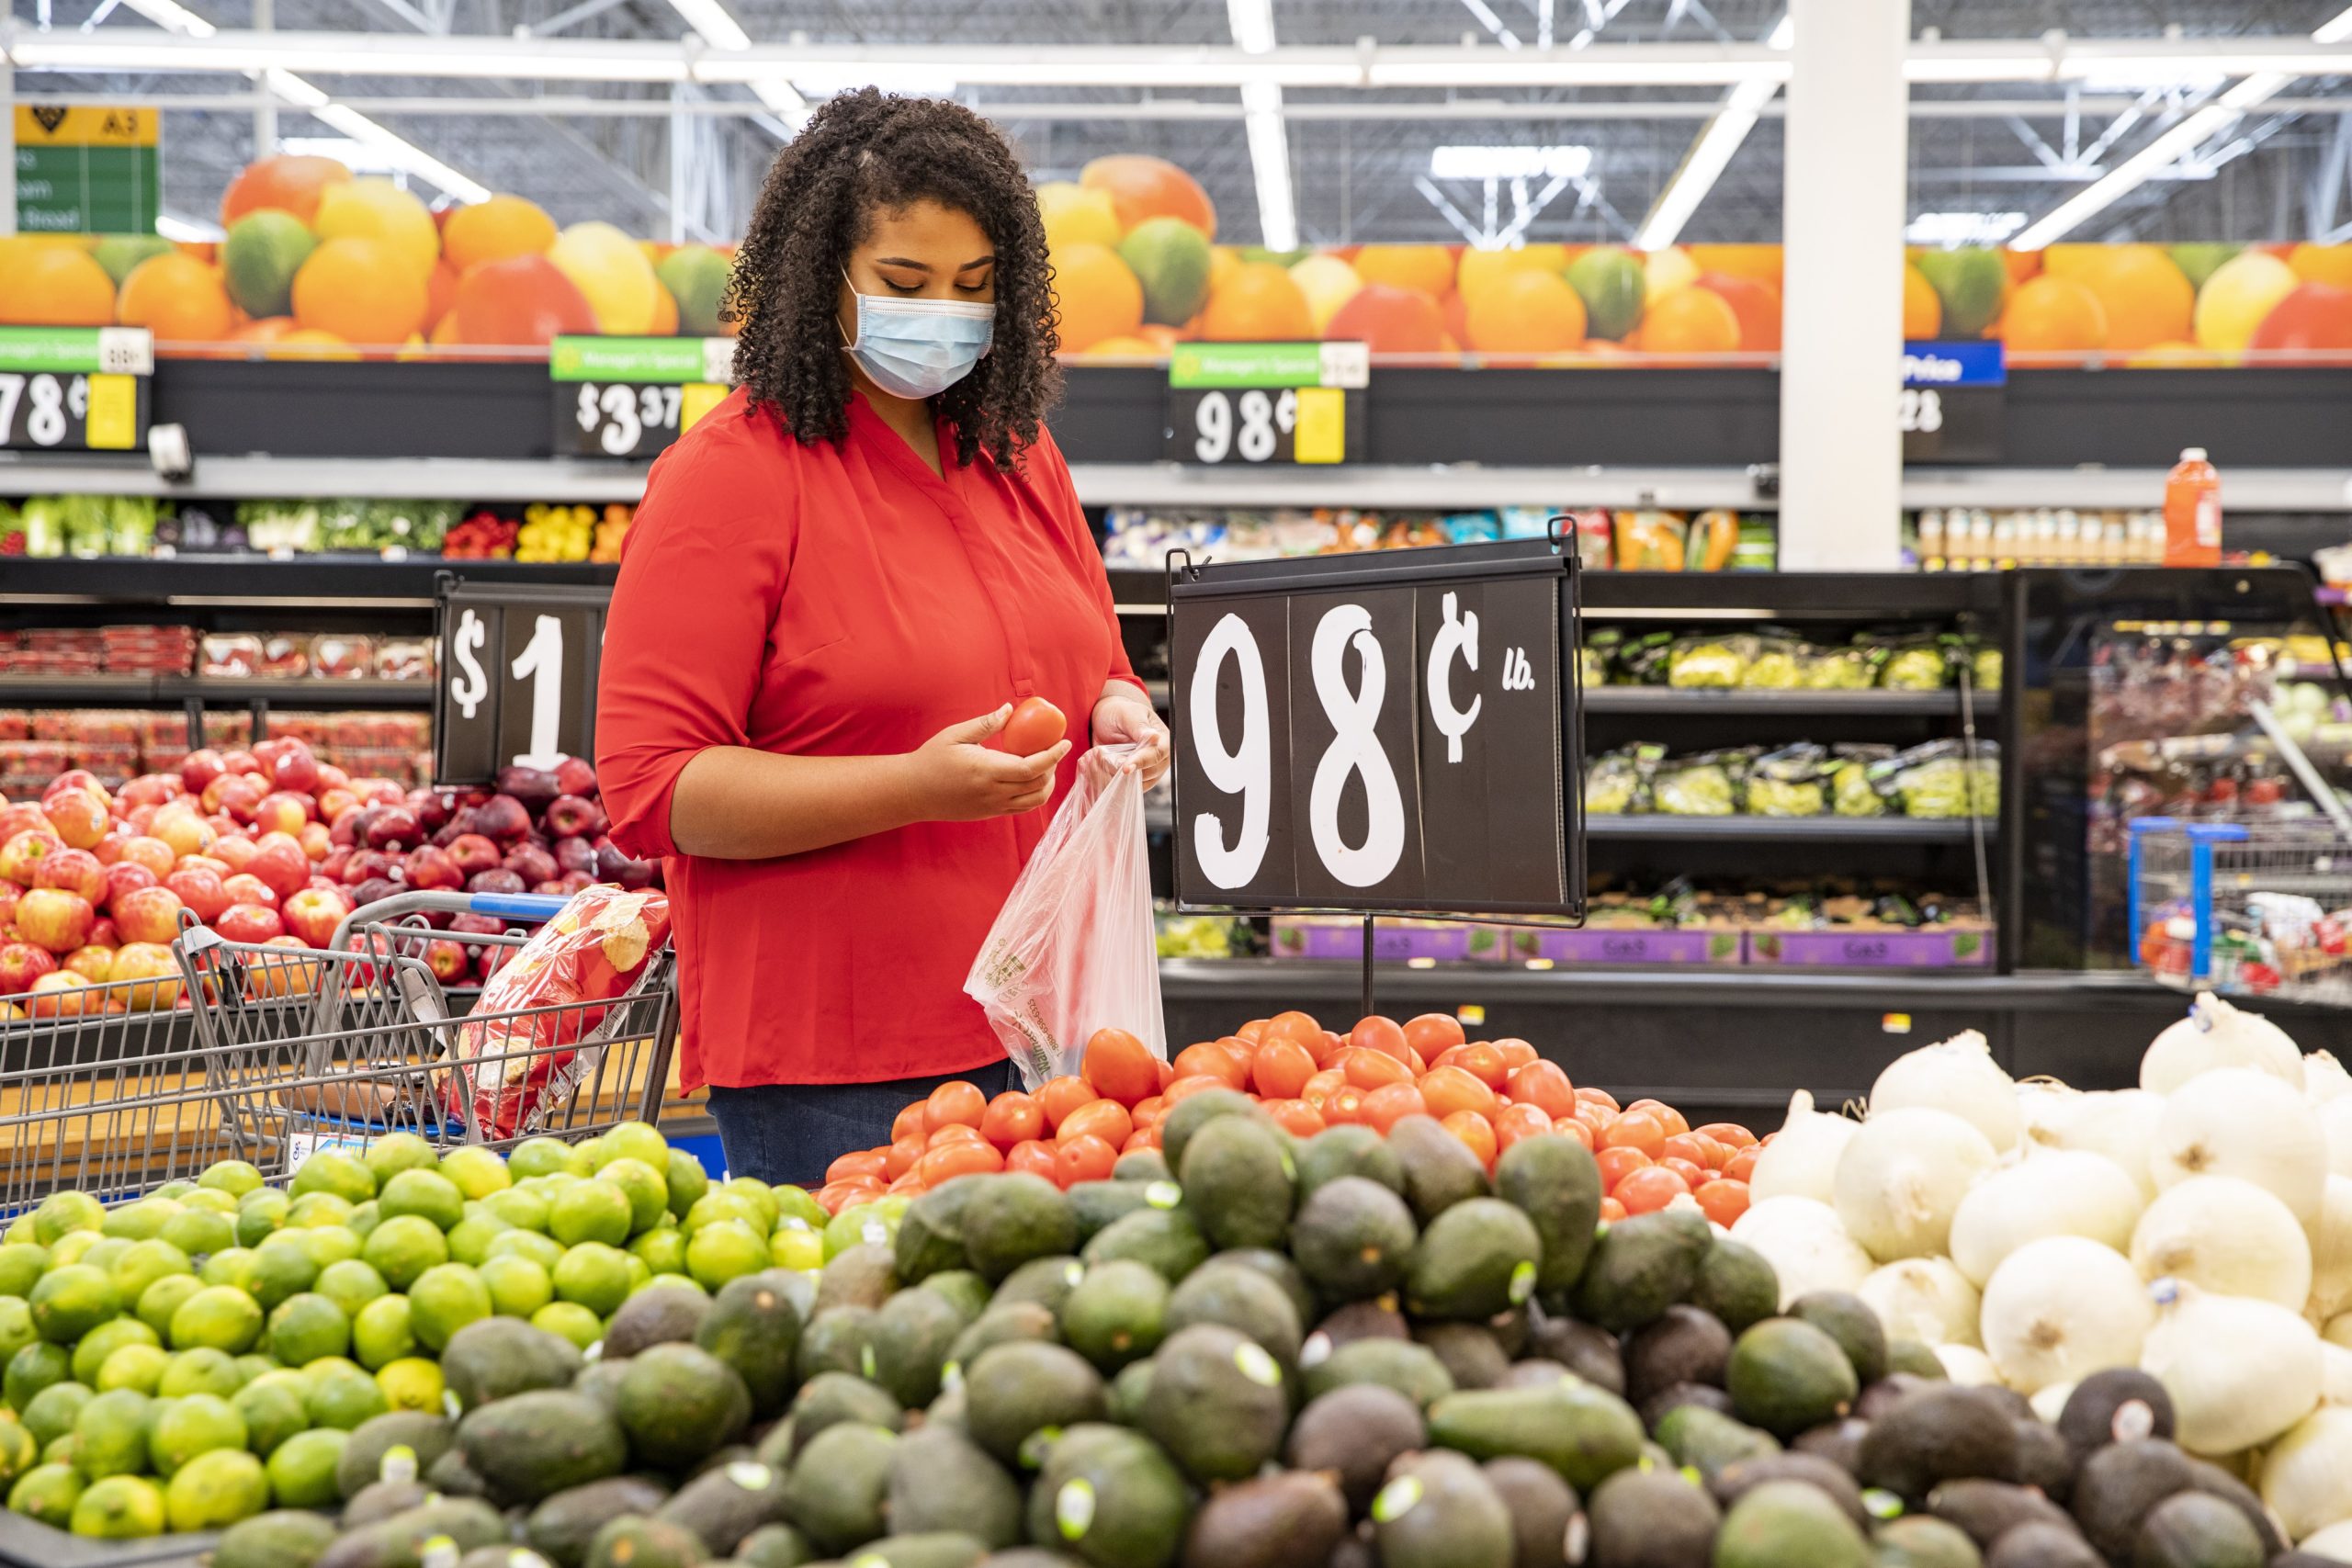 Walmart will require Face Coverings for shoppers, same for Sam's Club.